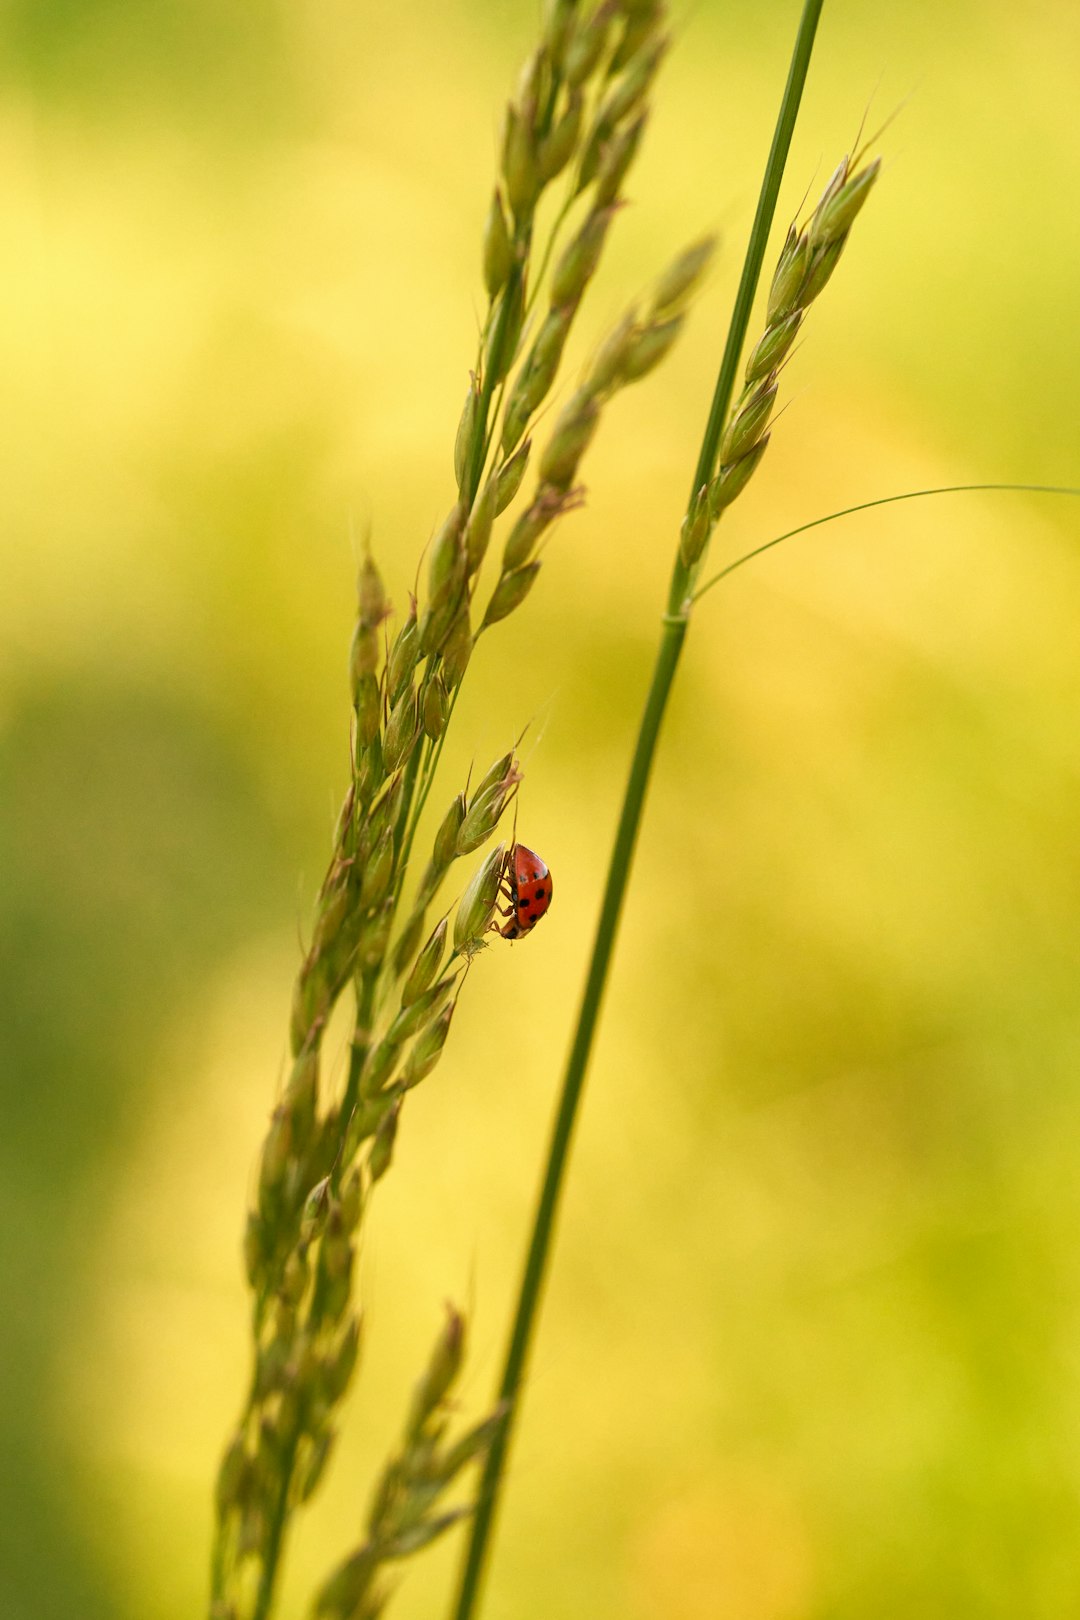 red ladybug perched on green grass in close up photography during daytime